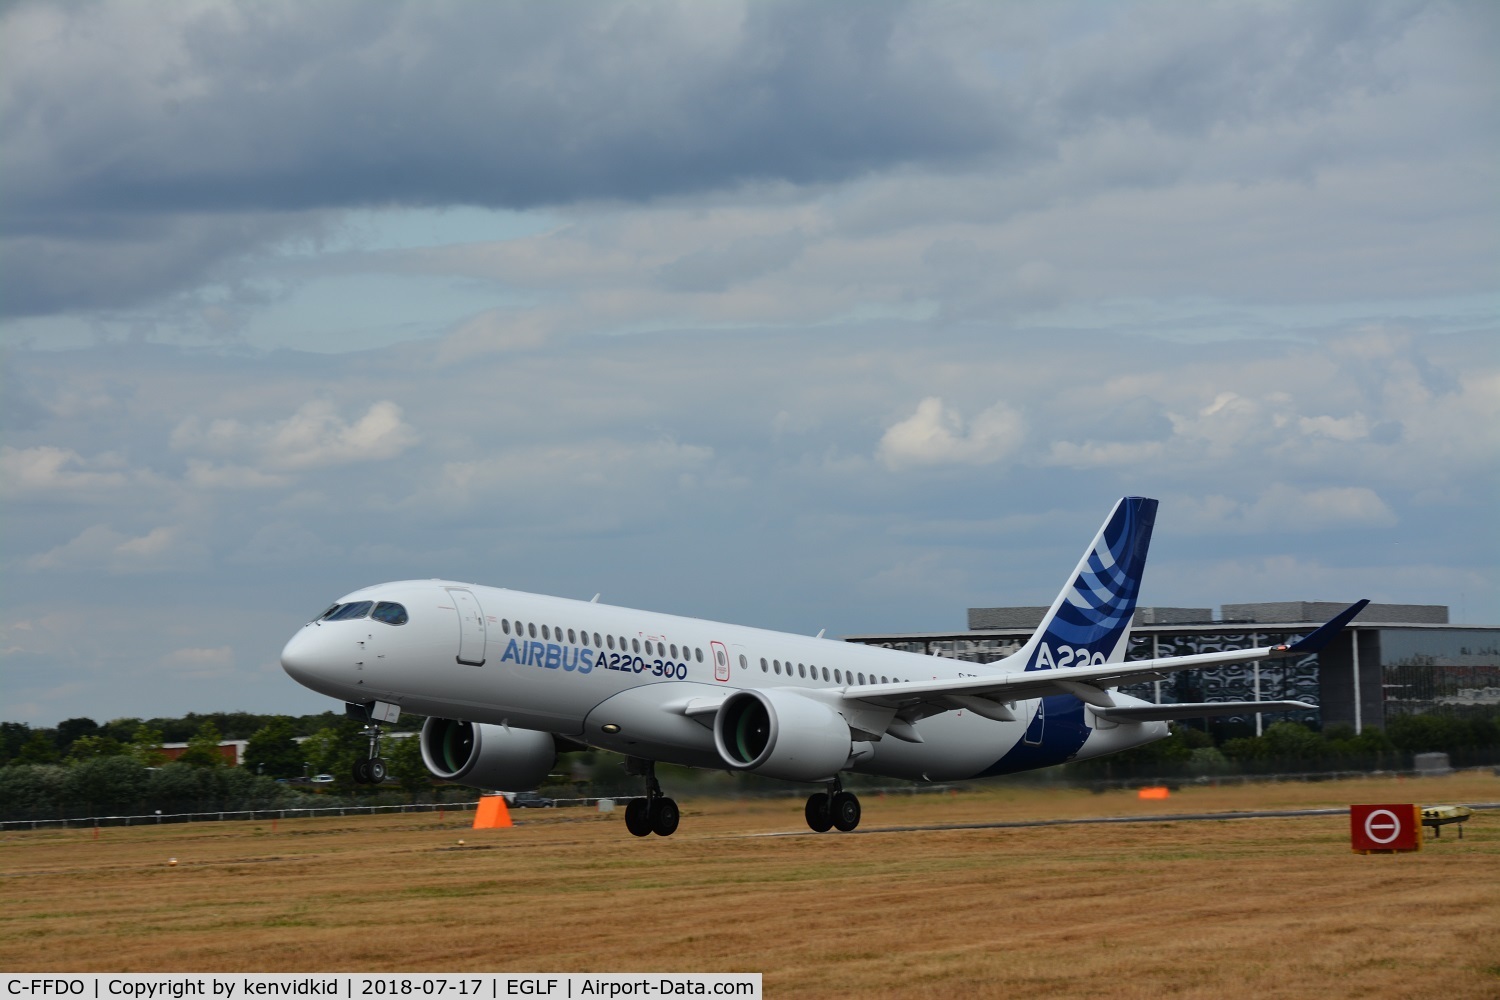 C-FFDO, 2015 Bombardier CSeries CS300 (BD-500-1A11) C/N 55002, Landing after its display at FIA 2018. Displaying it's new name Airbus 220-300